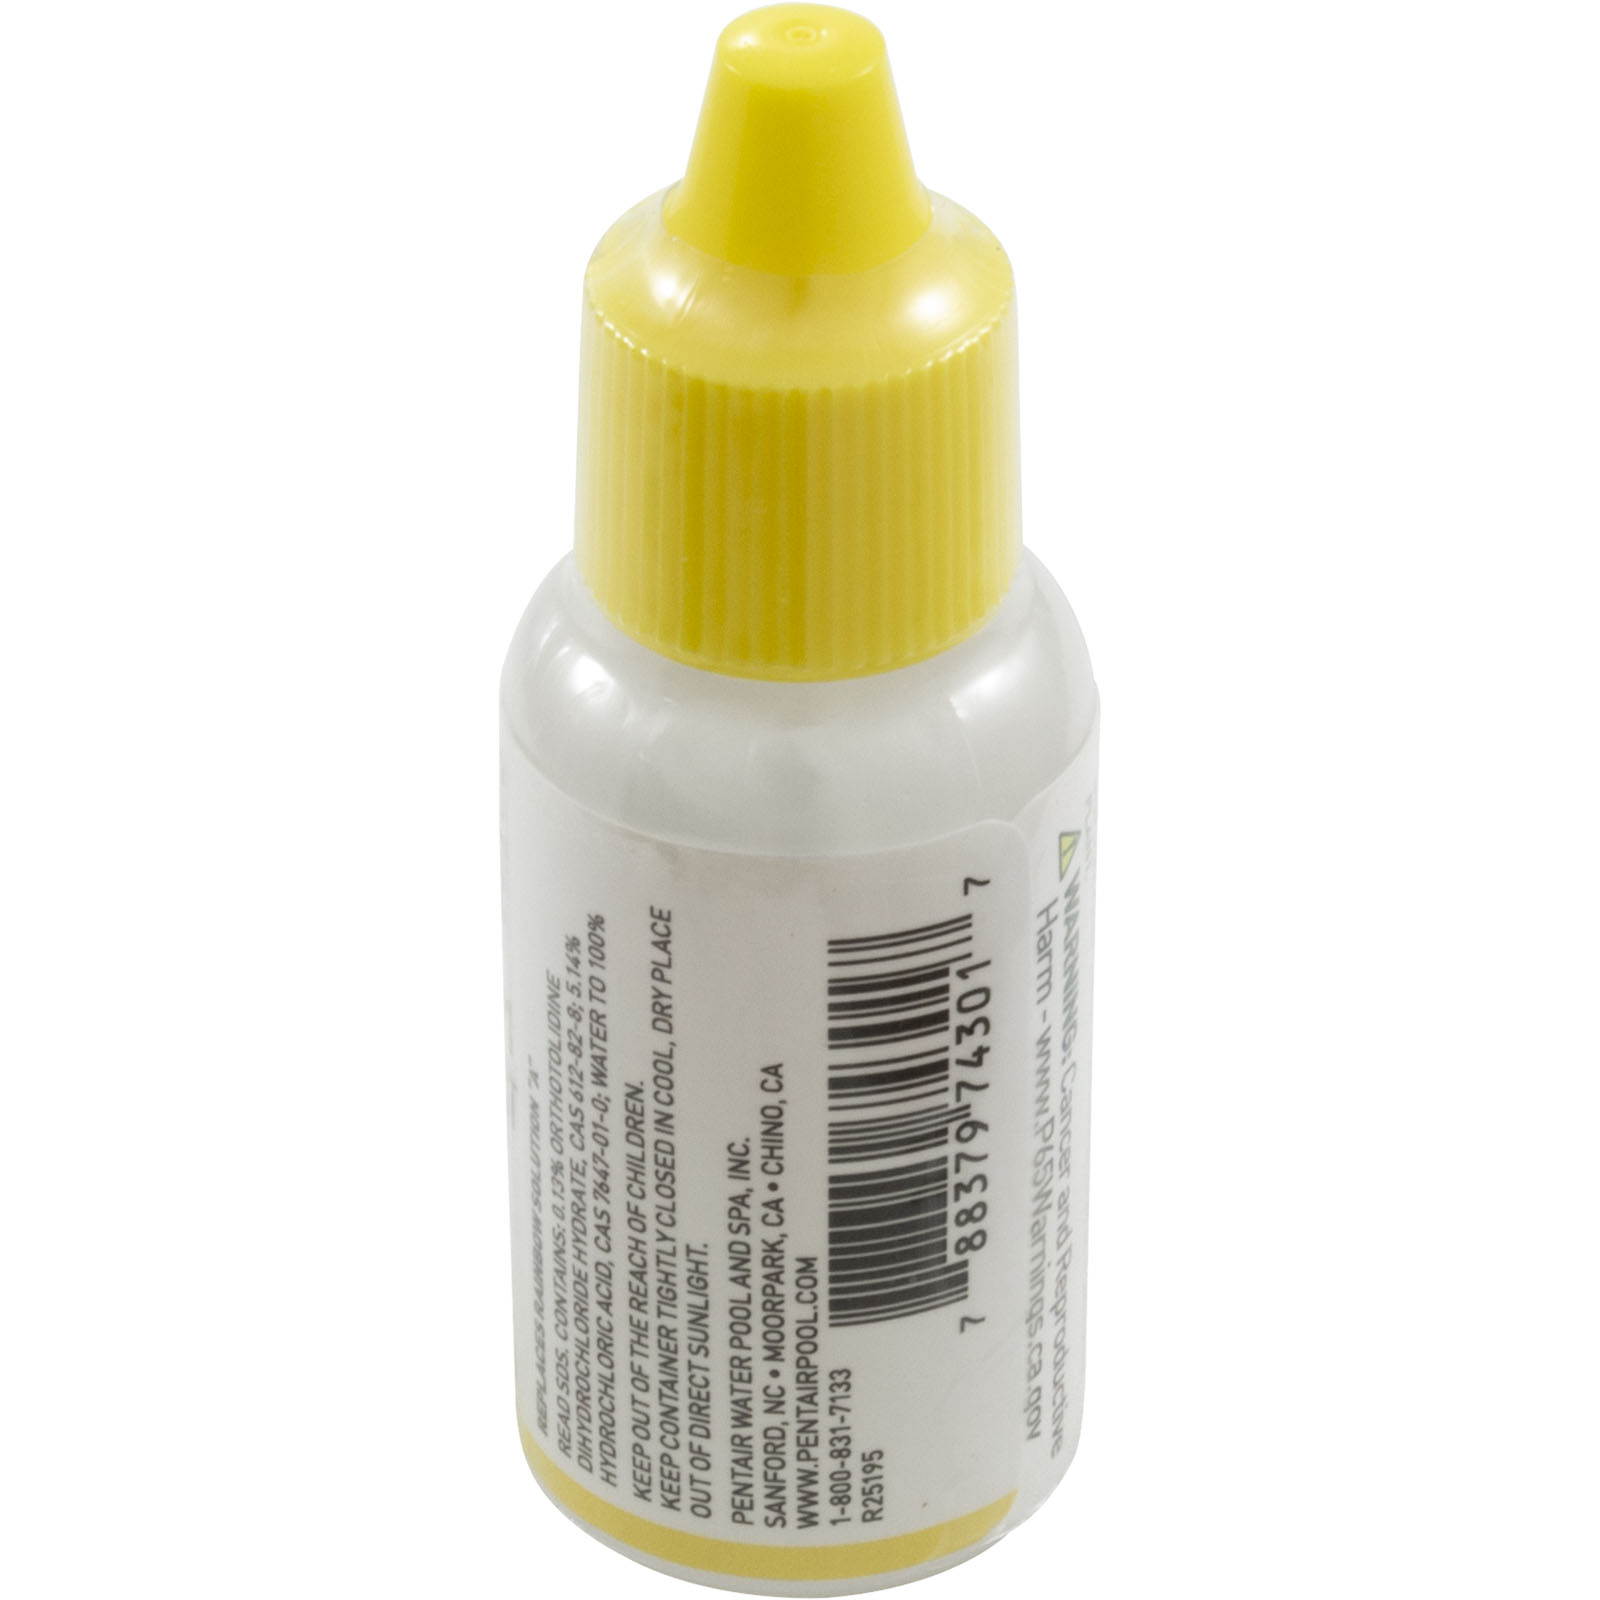 Picture of R161004 Test Solution Pentair OTO 1/2 Oz. Chlorine Bromine